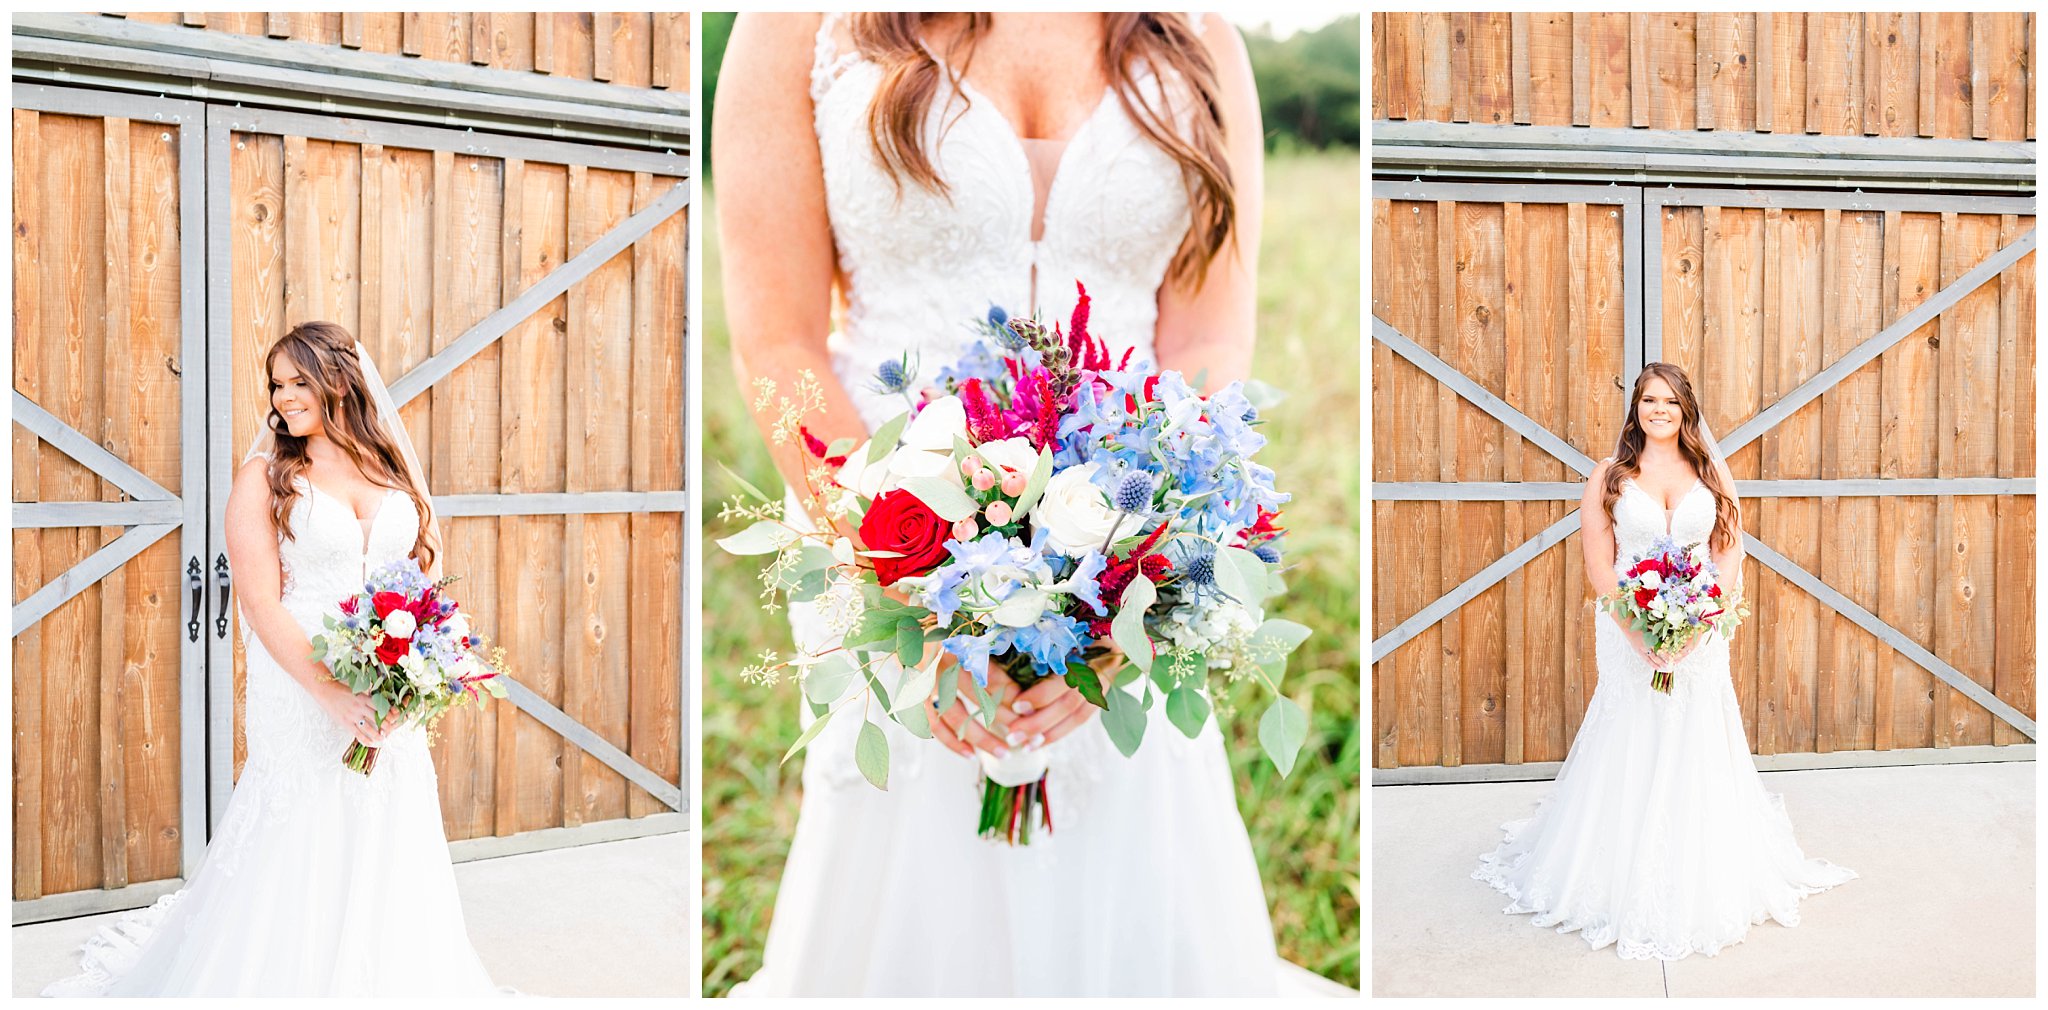 Nicole posing in front of barn with red, white, and blue bouquet for her rustic bridal portraits